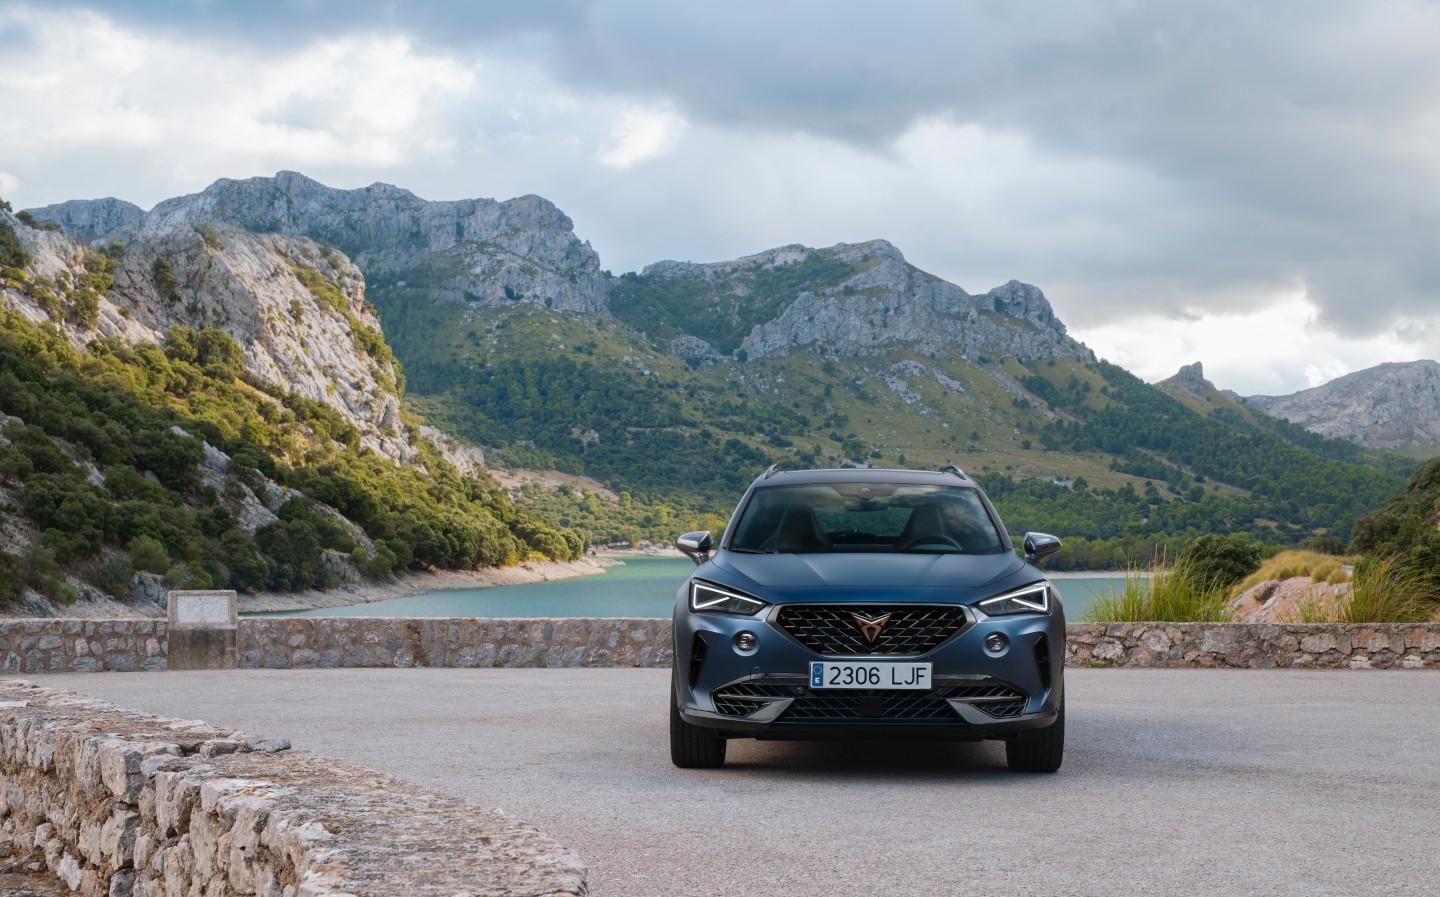 The Clarkson Review: Cupra Formentor